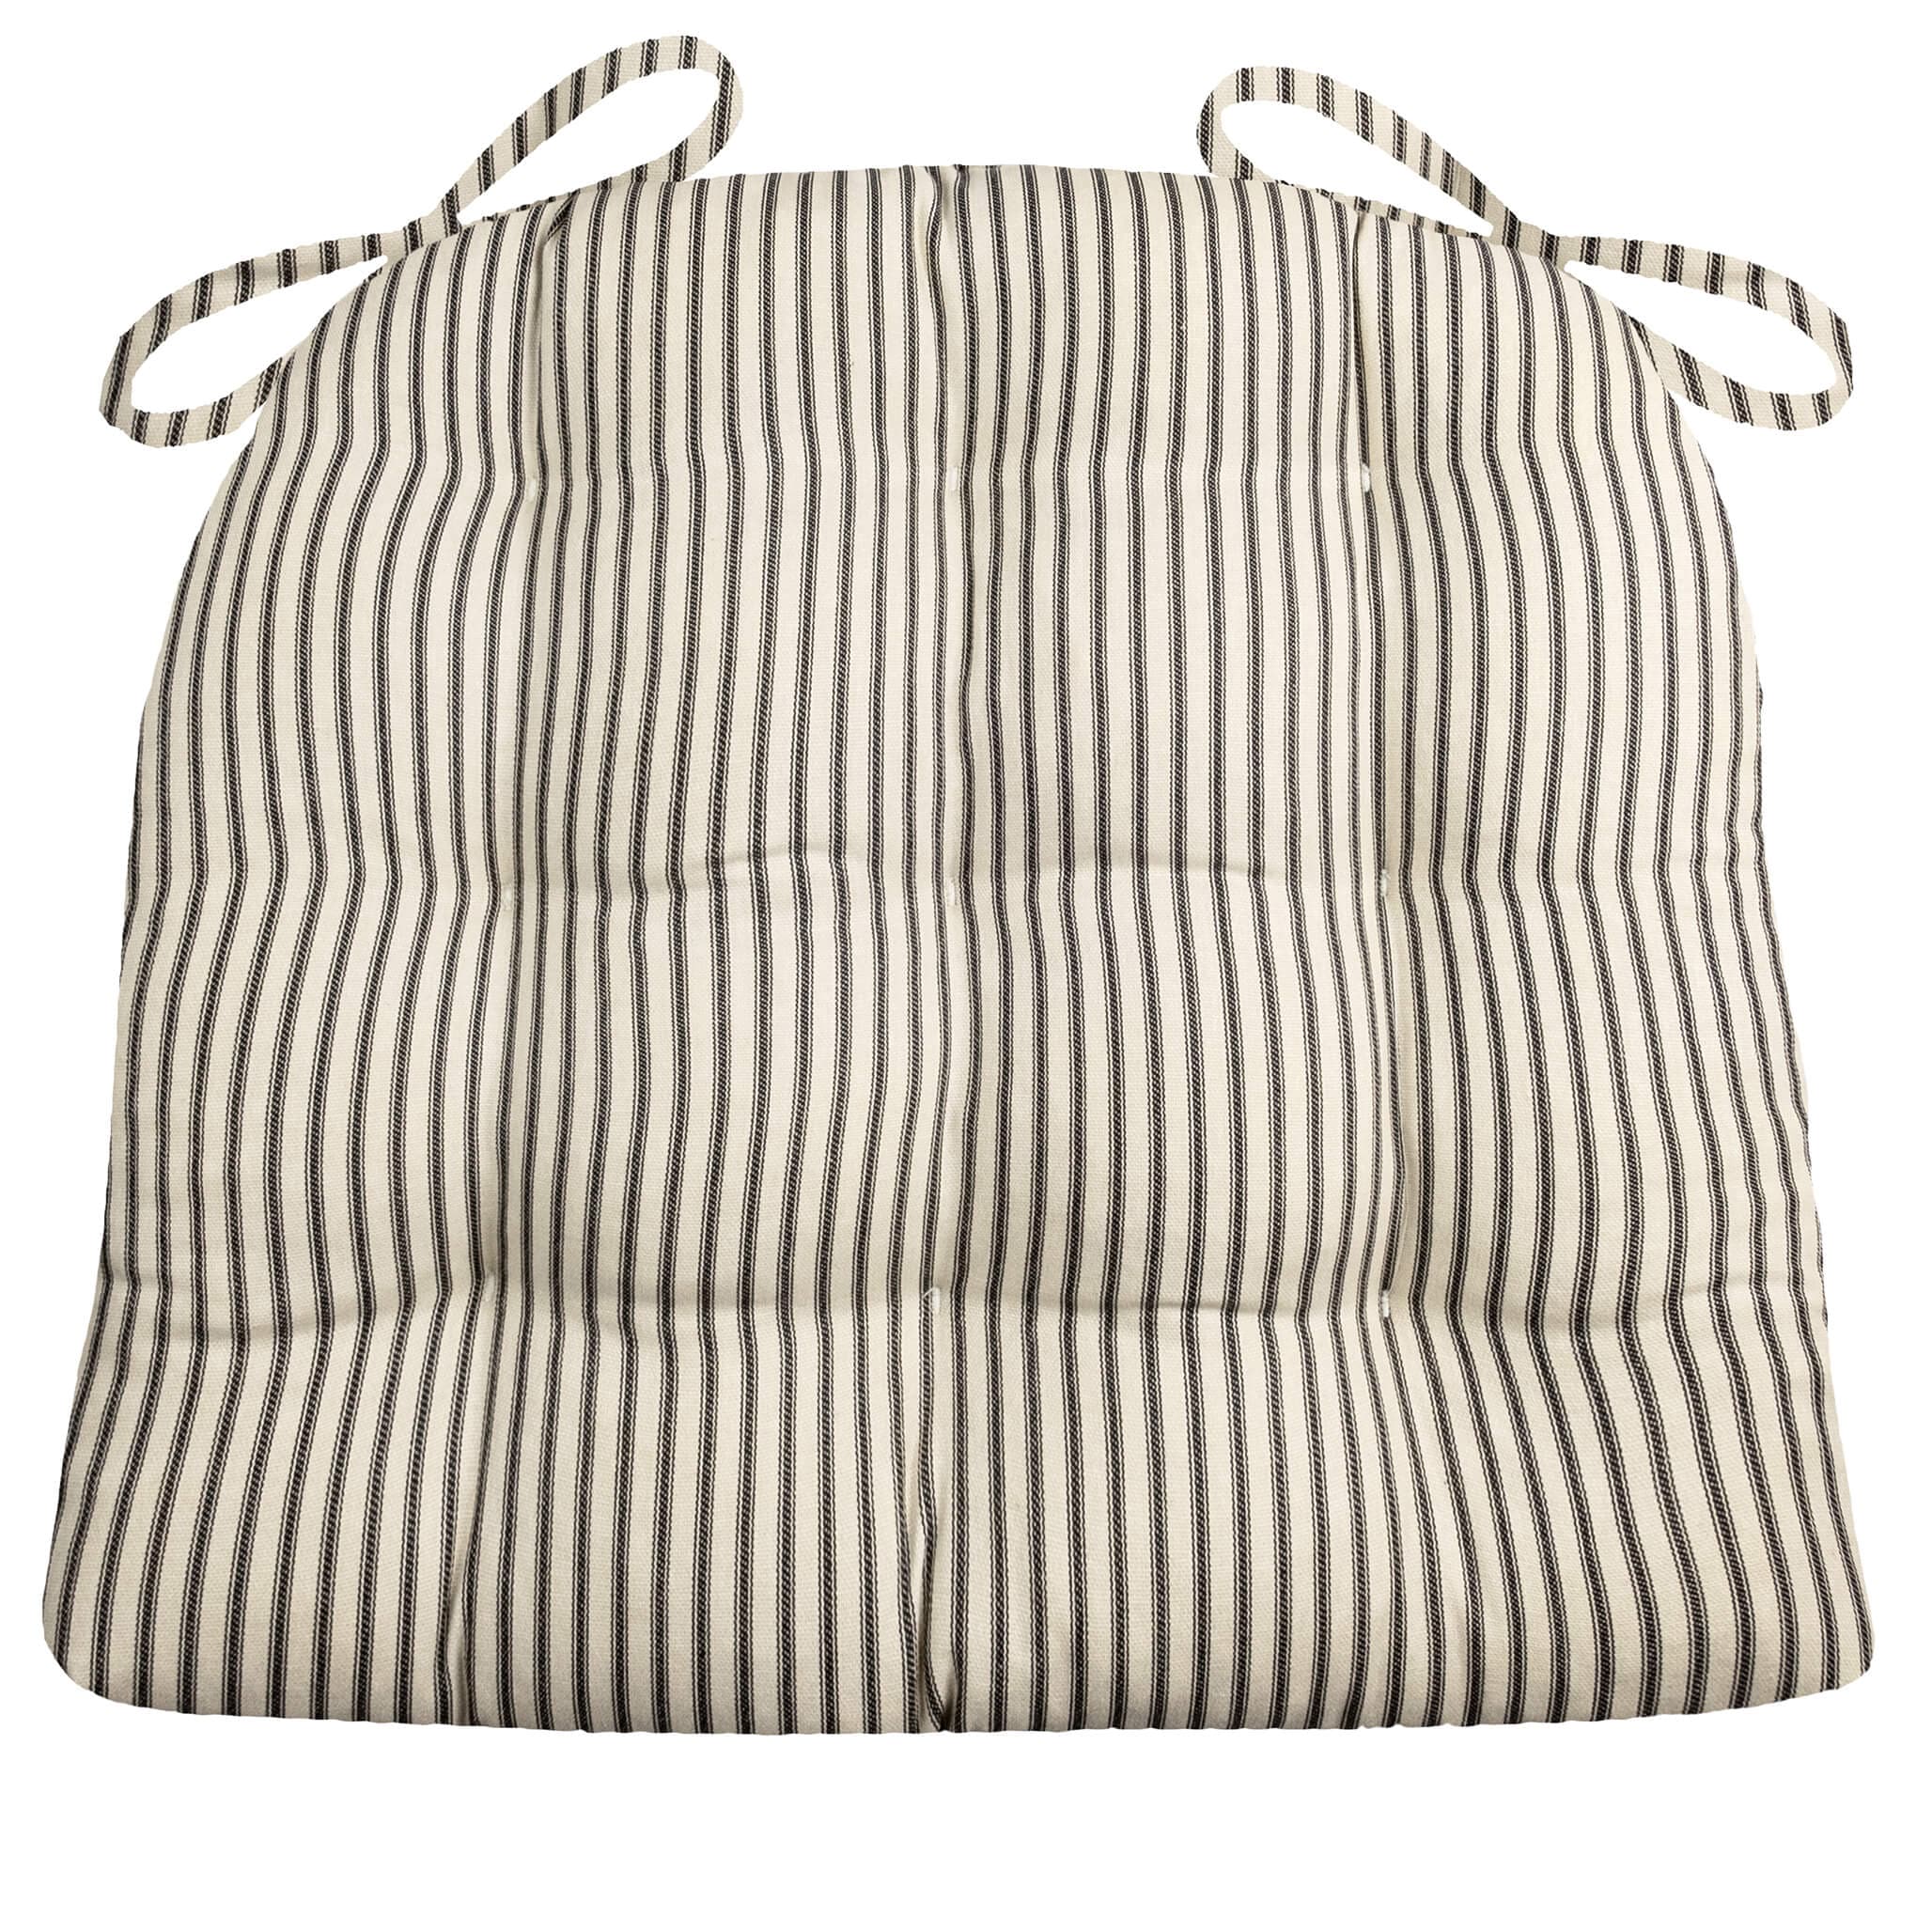 Grateful Home — Custom Bench or Window Seat Cushion, in Black Ticking  Stripe Fabric, with French Mattress Edging